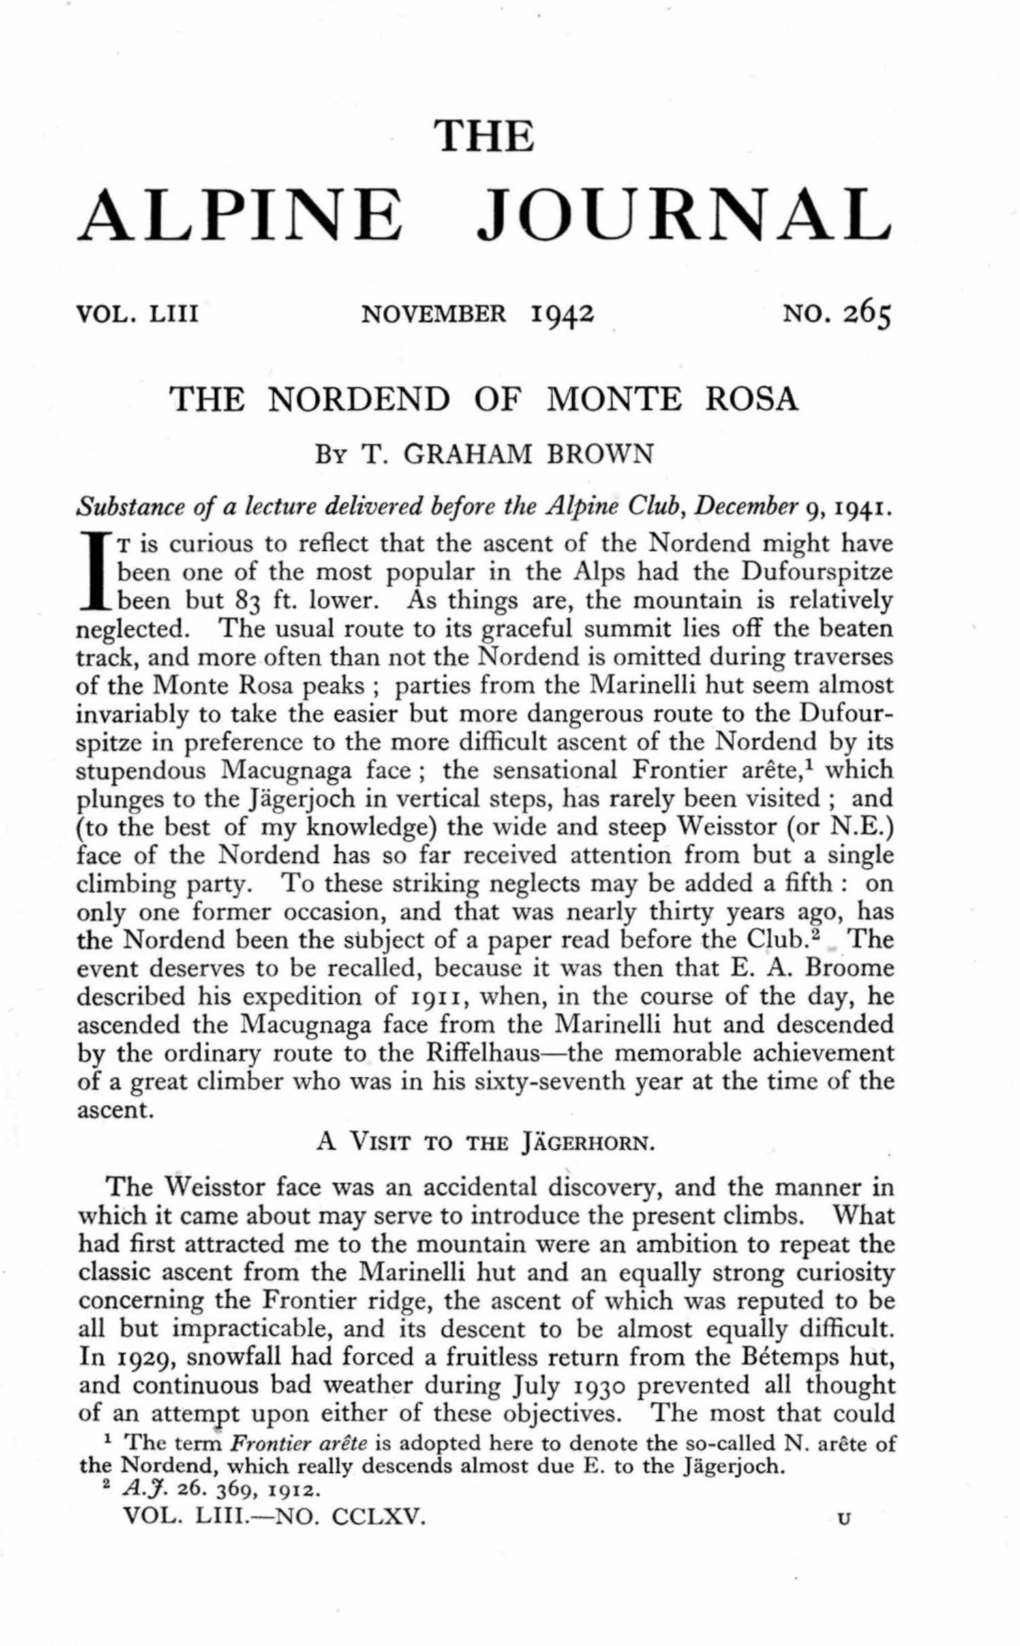 THE NORDEND of MONTE ROSA. T. Graham Brown